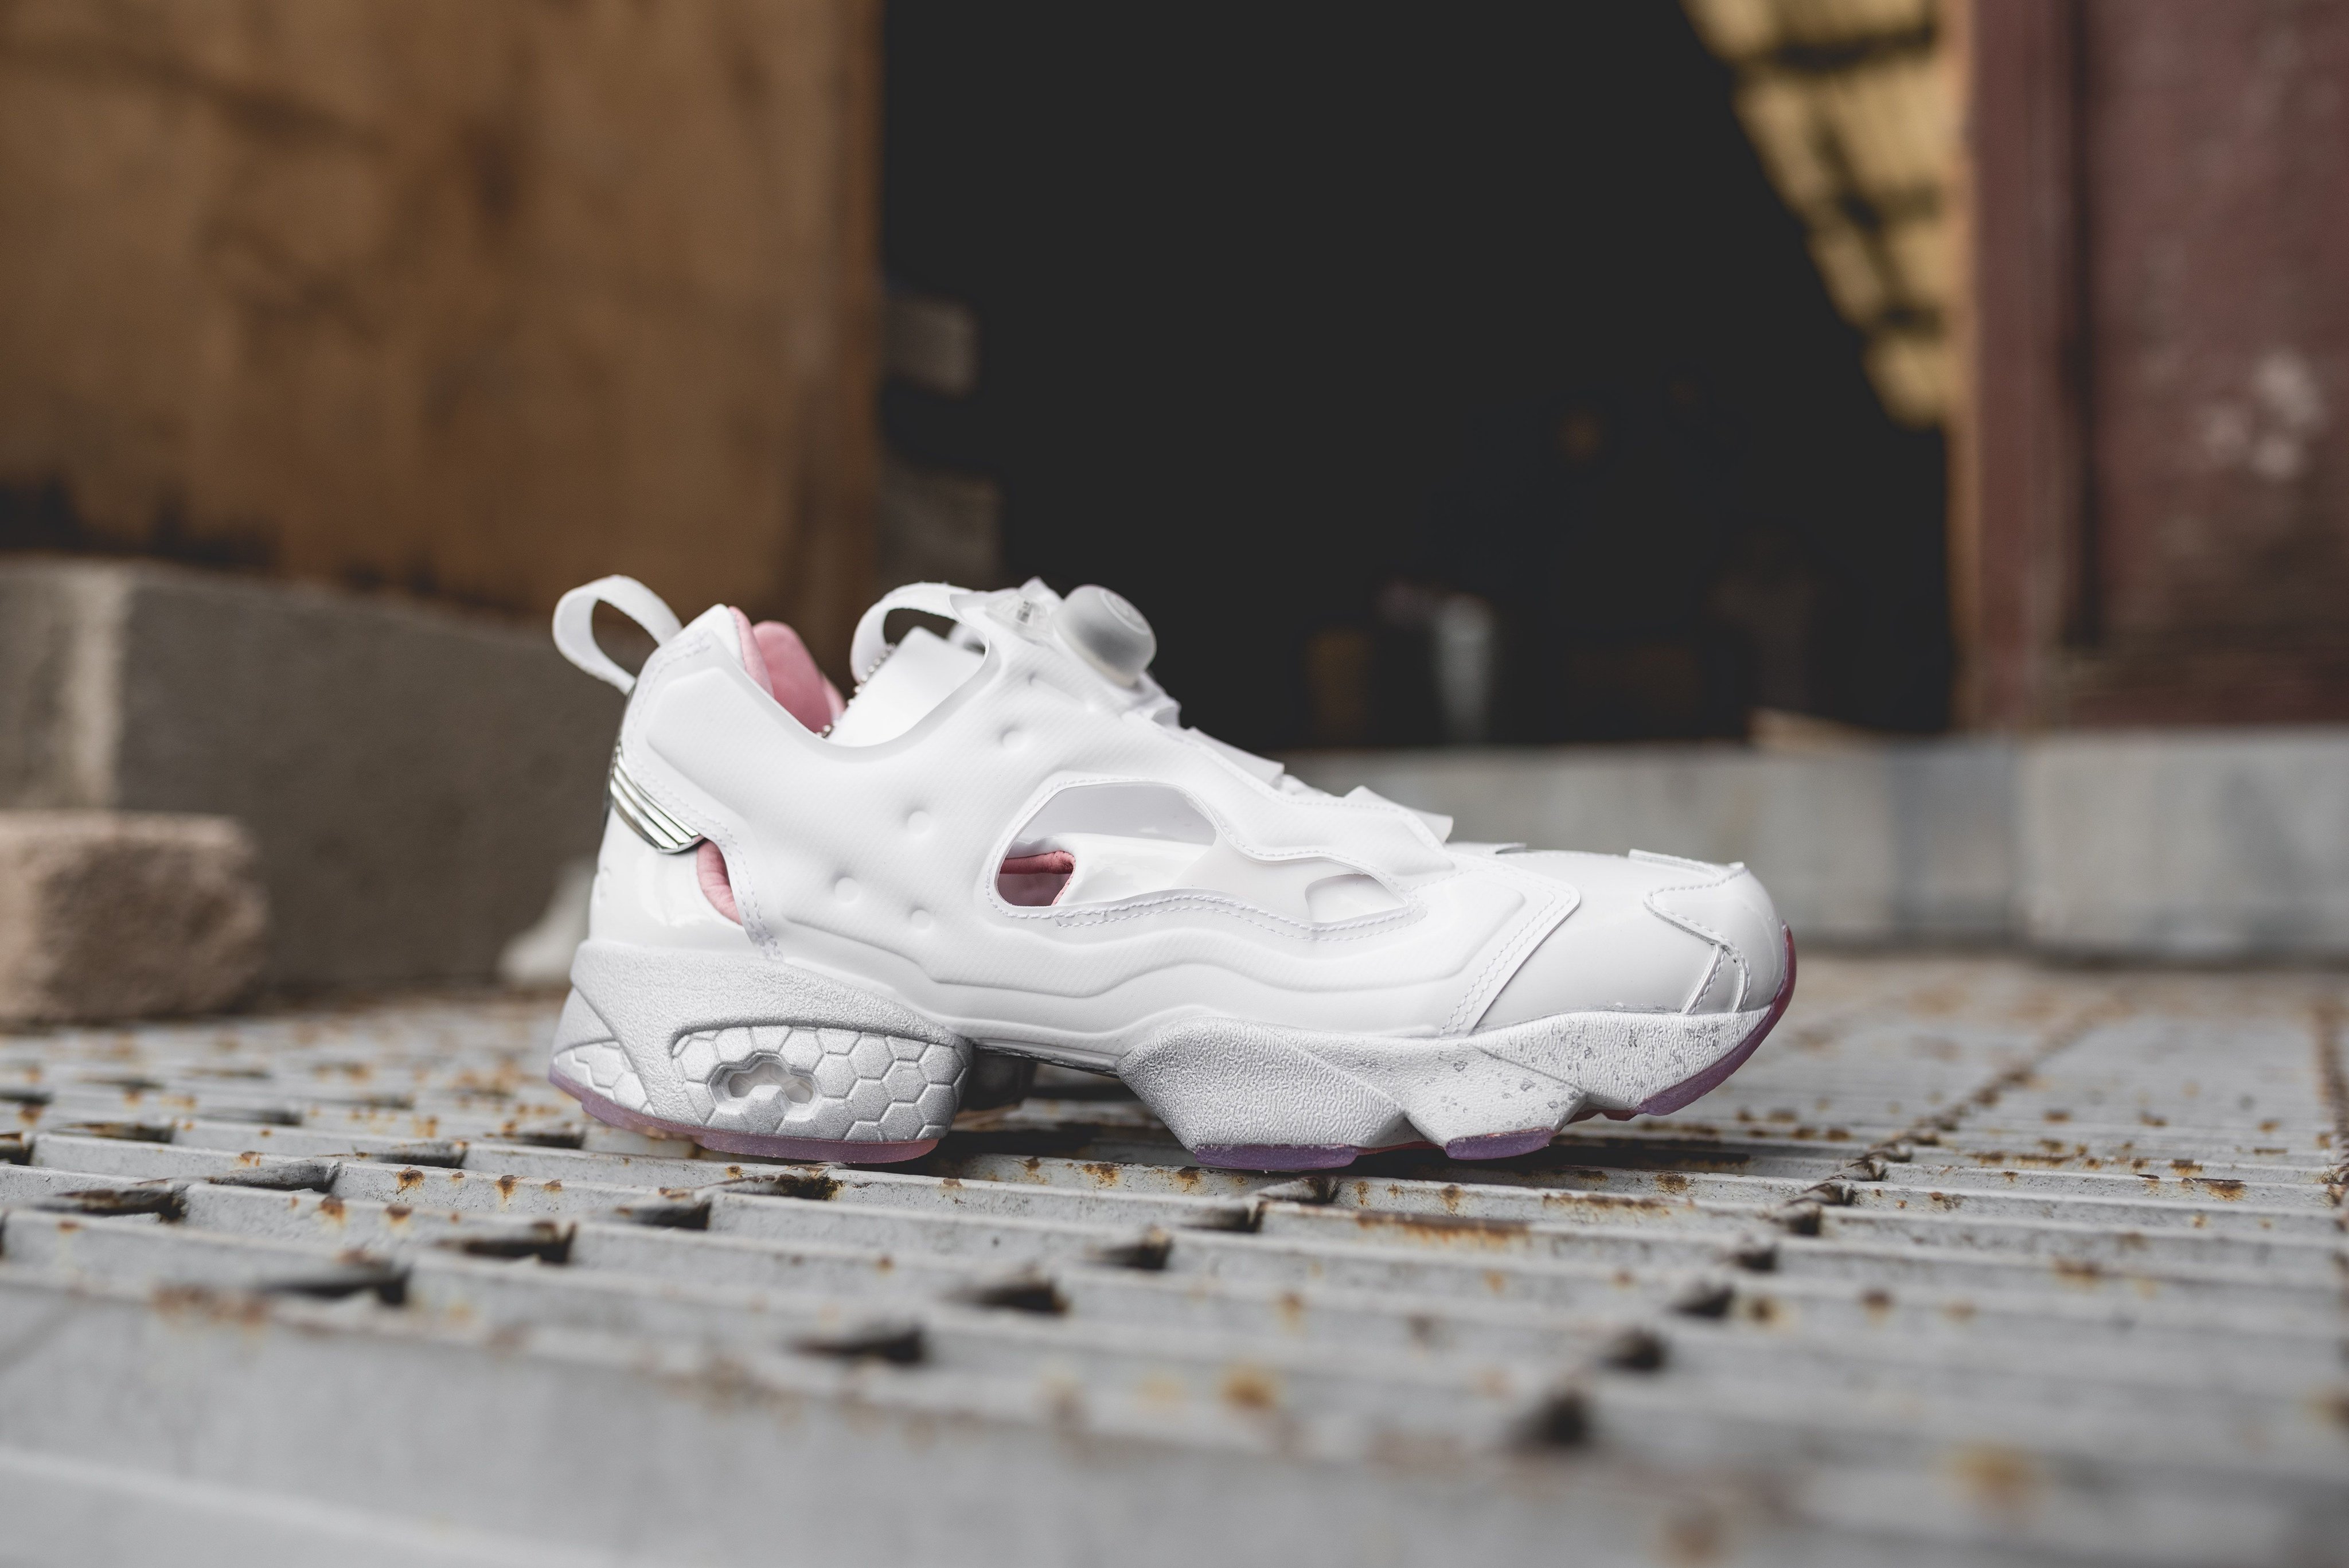 on X: "Reebok Instapump Fury x Epitome "Evolution of the Woman" is available to buy ONLINE now! #hanon #epitome https://t.co/H8IalnideO https://t.co/nOllhskGzC" / X